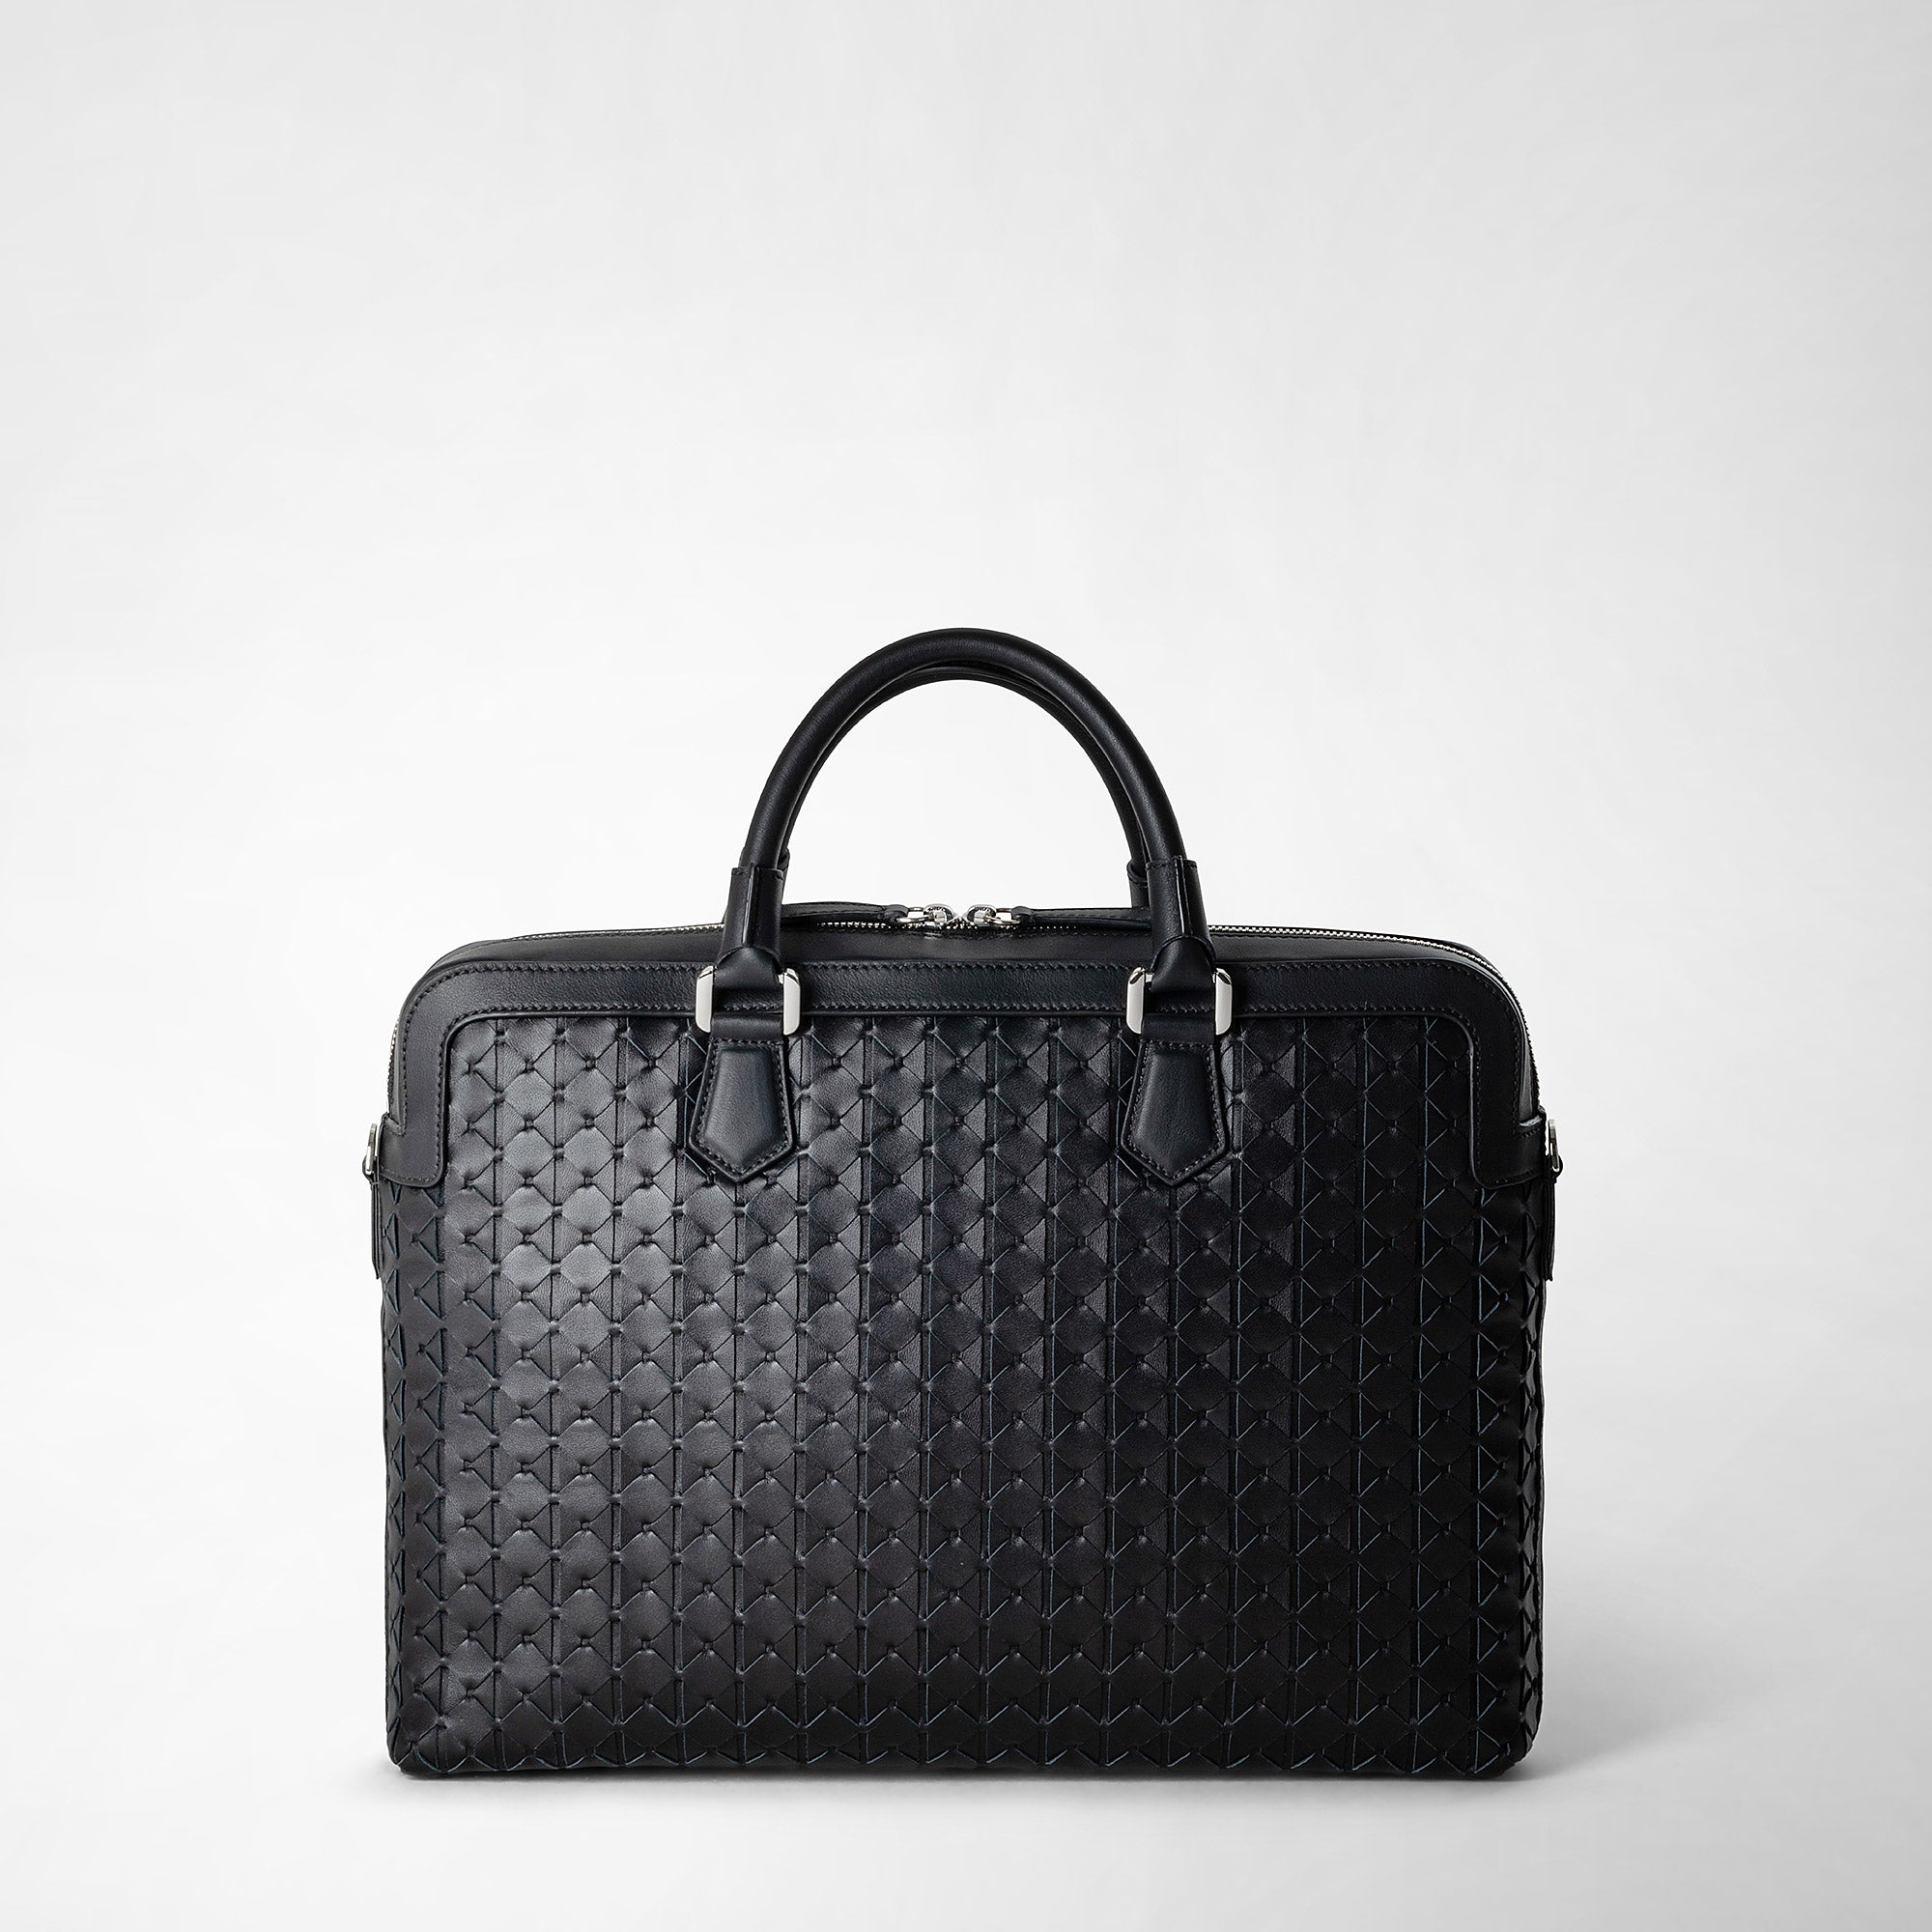 Buy Louis Vuitton Briefcase Online In India -  India